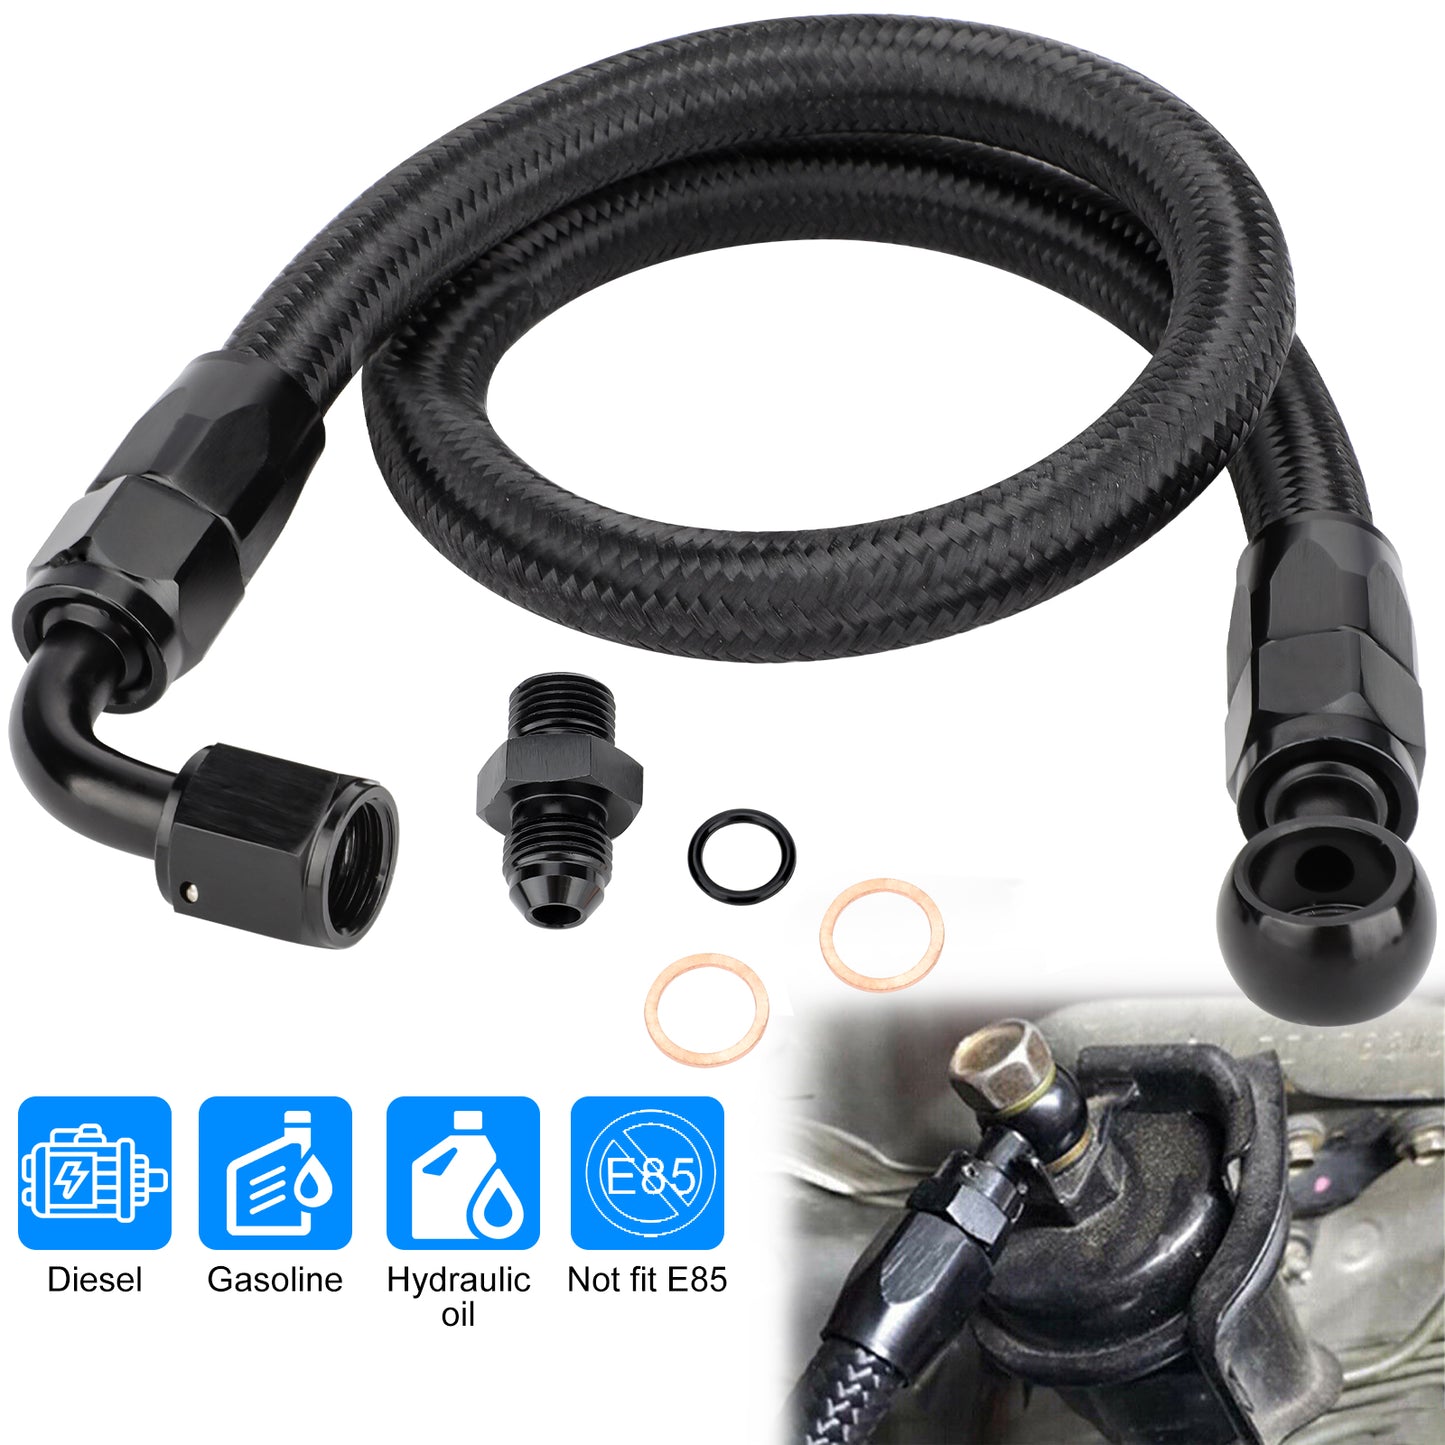 Braided Fuel Line Hose Kit - High-Quality Nylon with 14mm Banjo to 90 Degree 6AN Fitting, Easy Installation